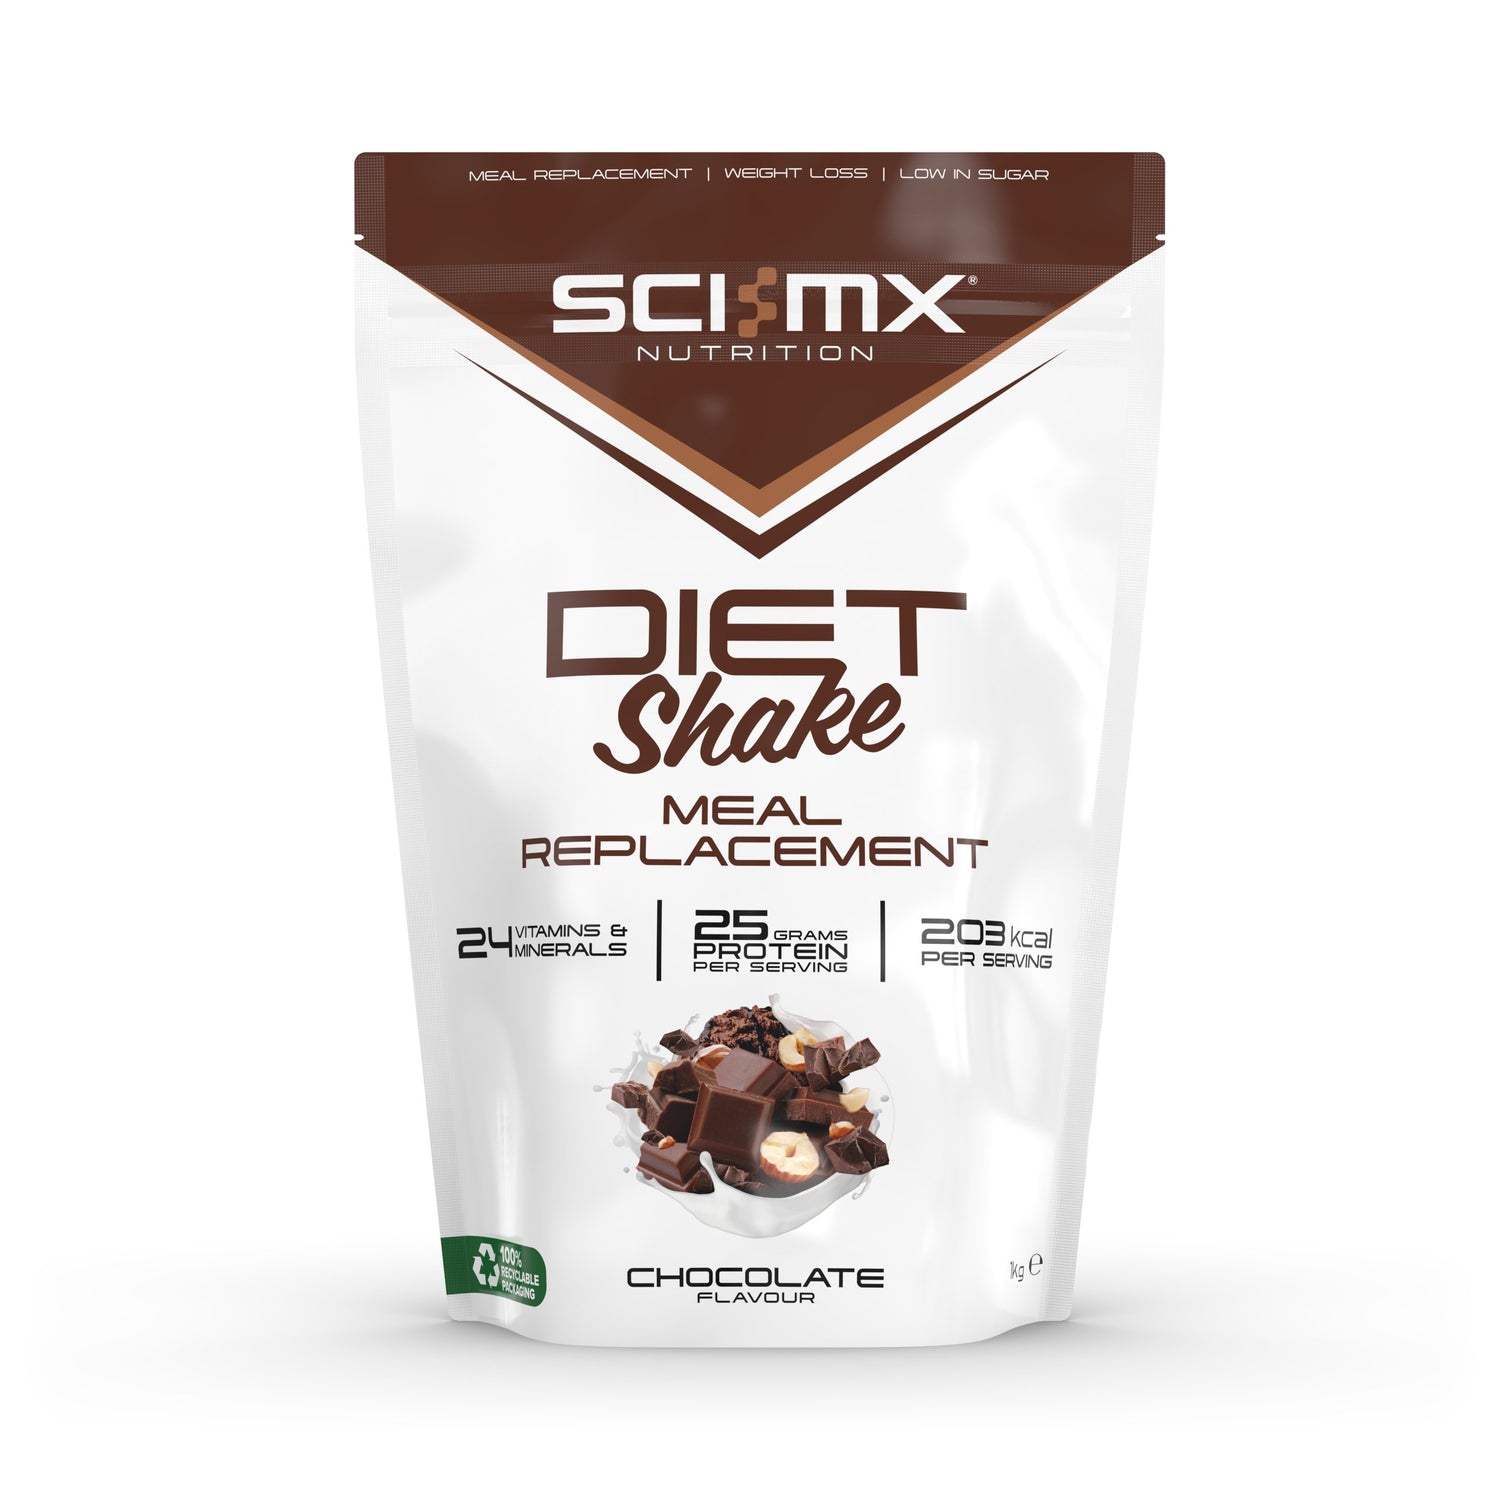 Sci-MX Diet Meal Replacement - 3 flavours to choose from - theskinnyfoodco